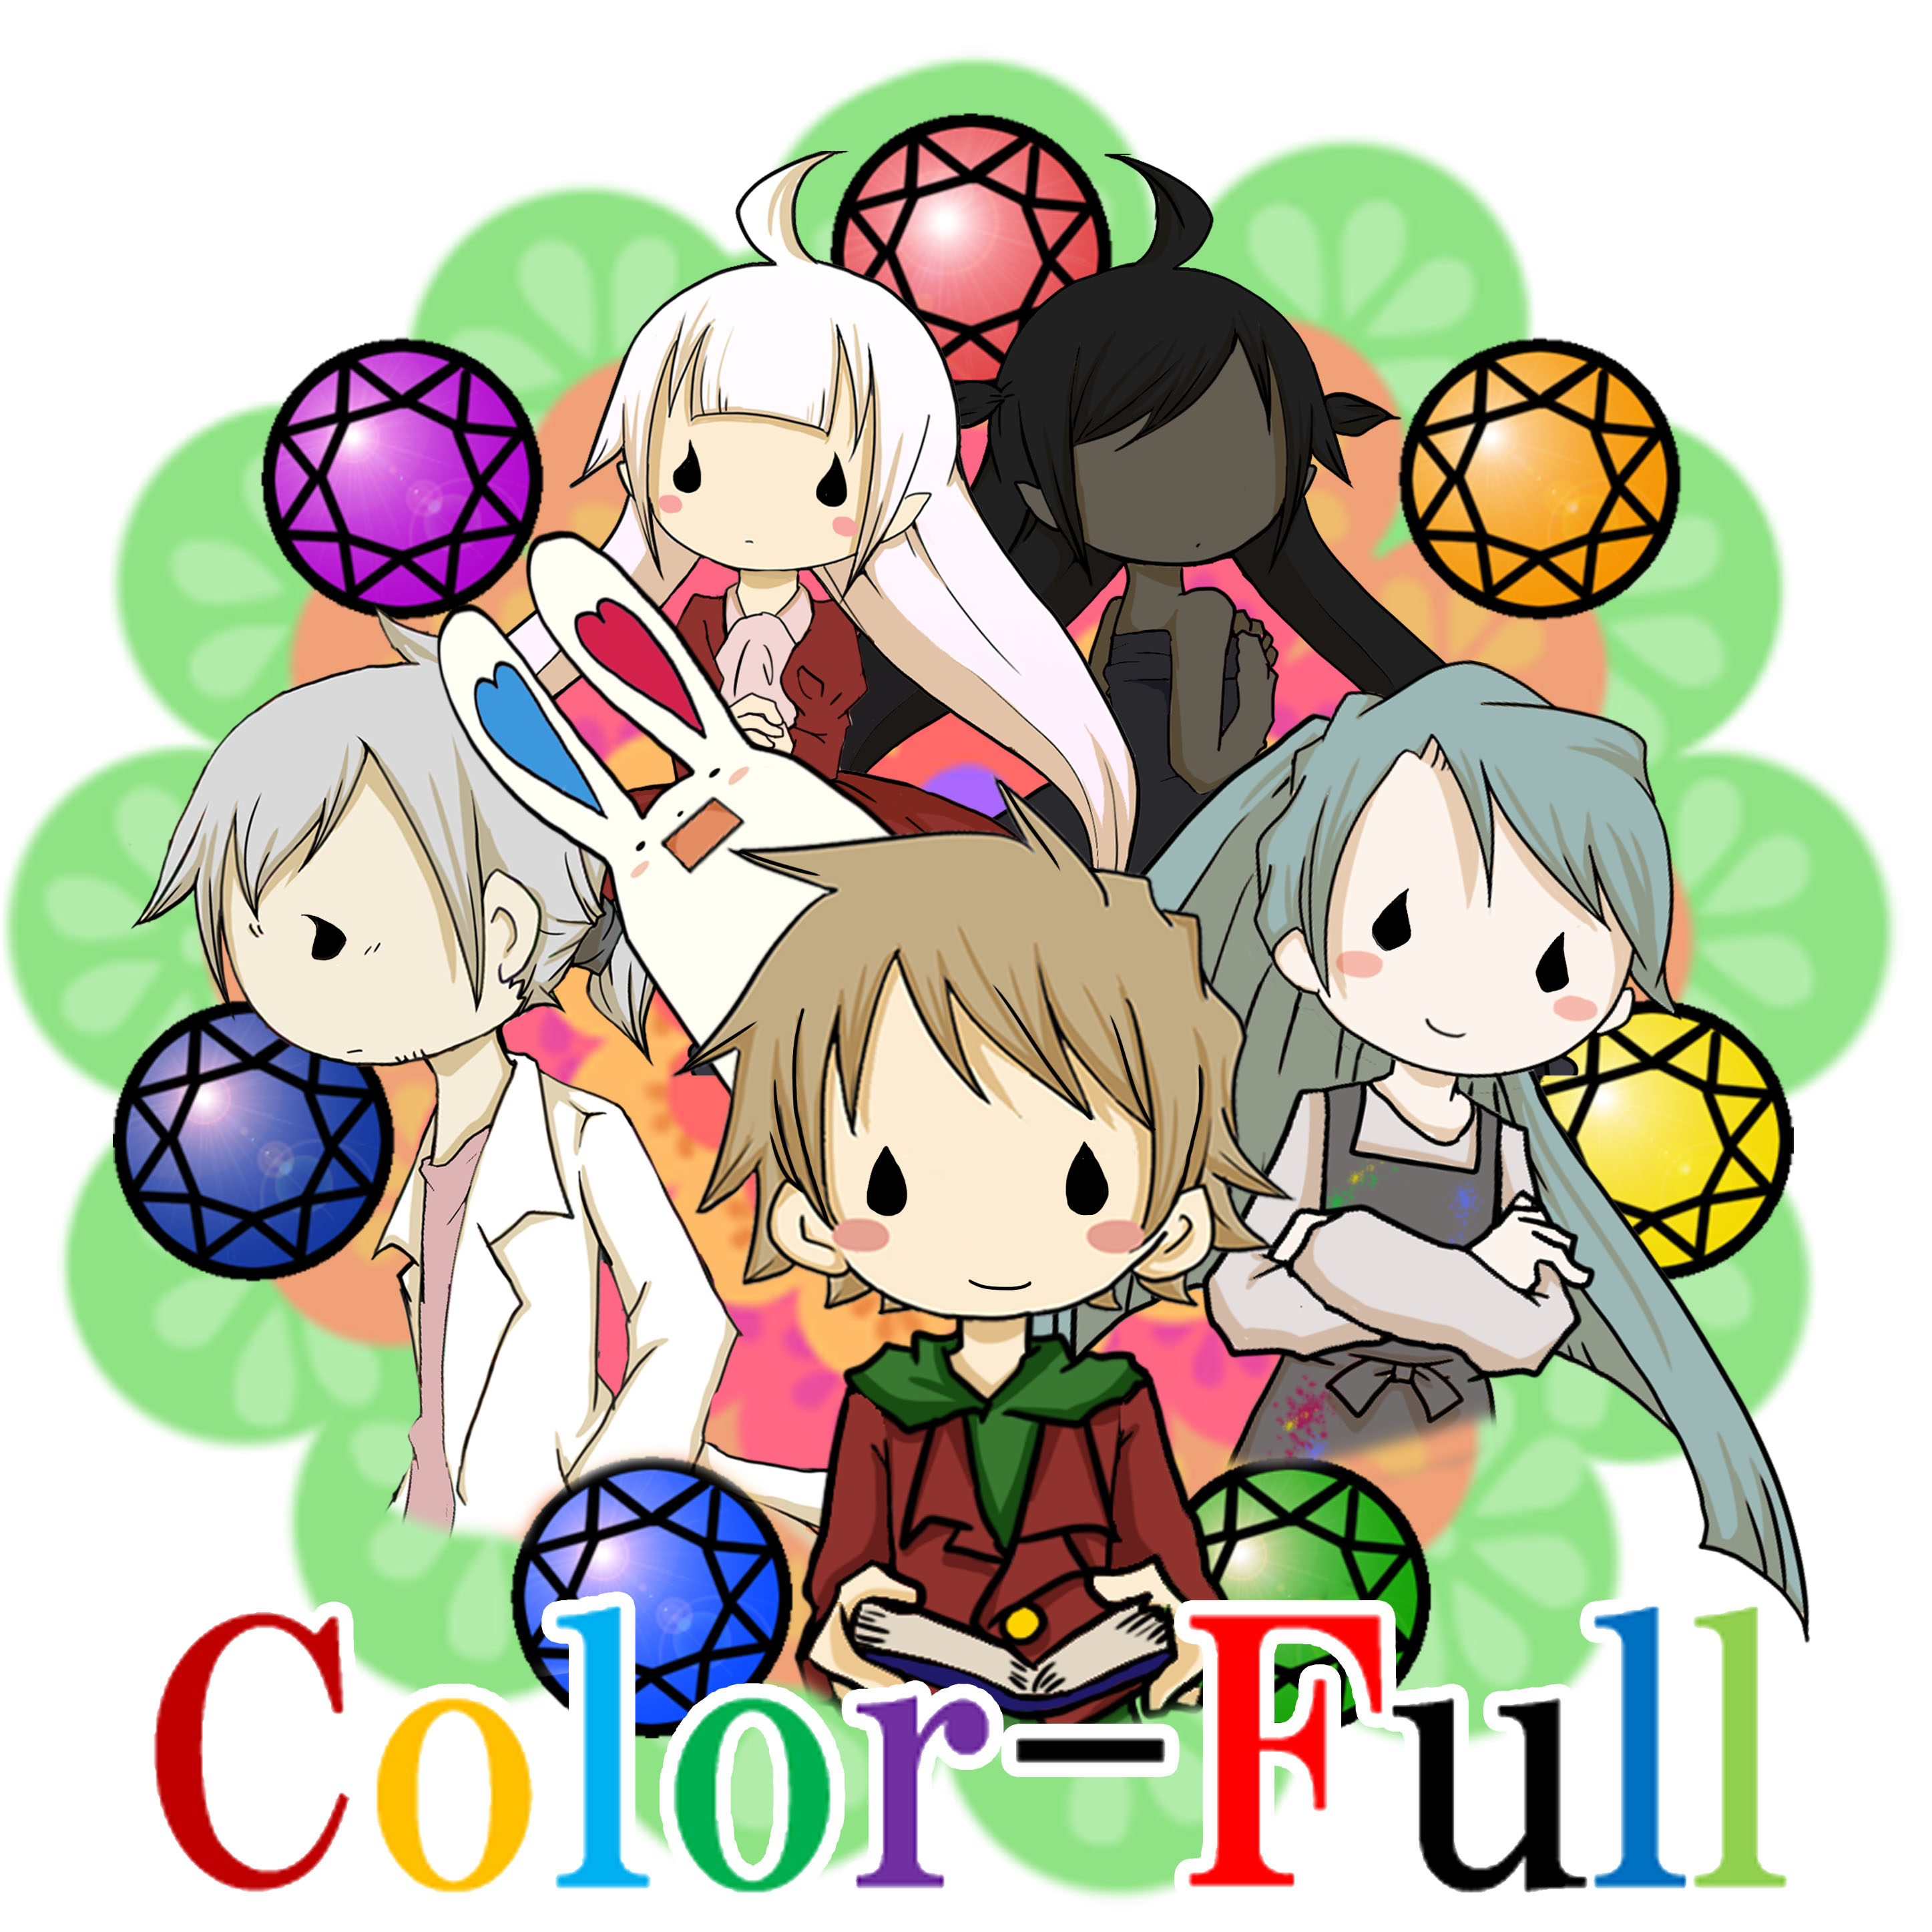 Color-Full アニメ